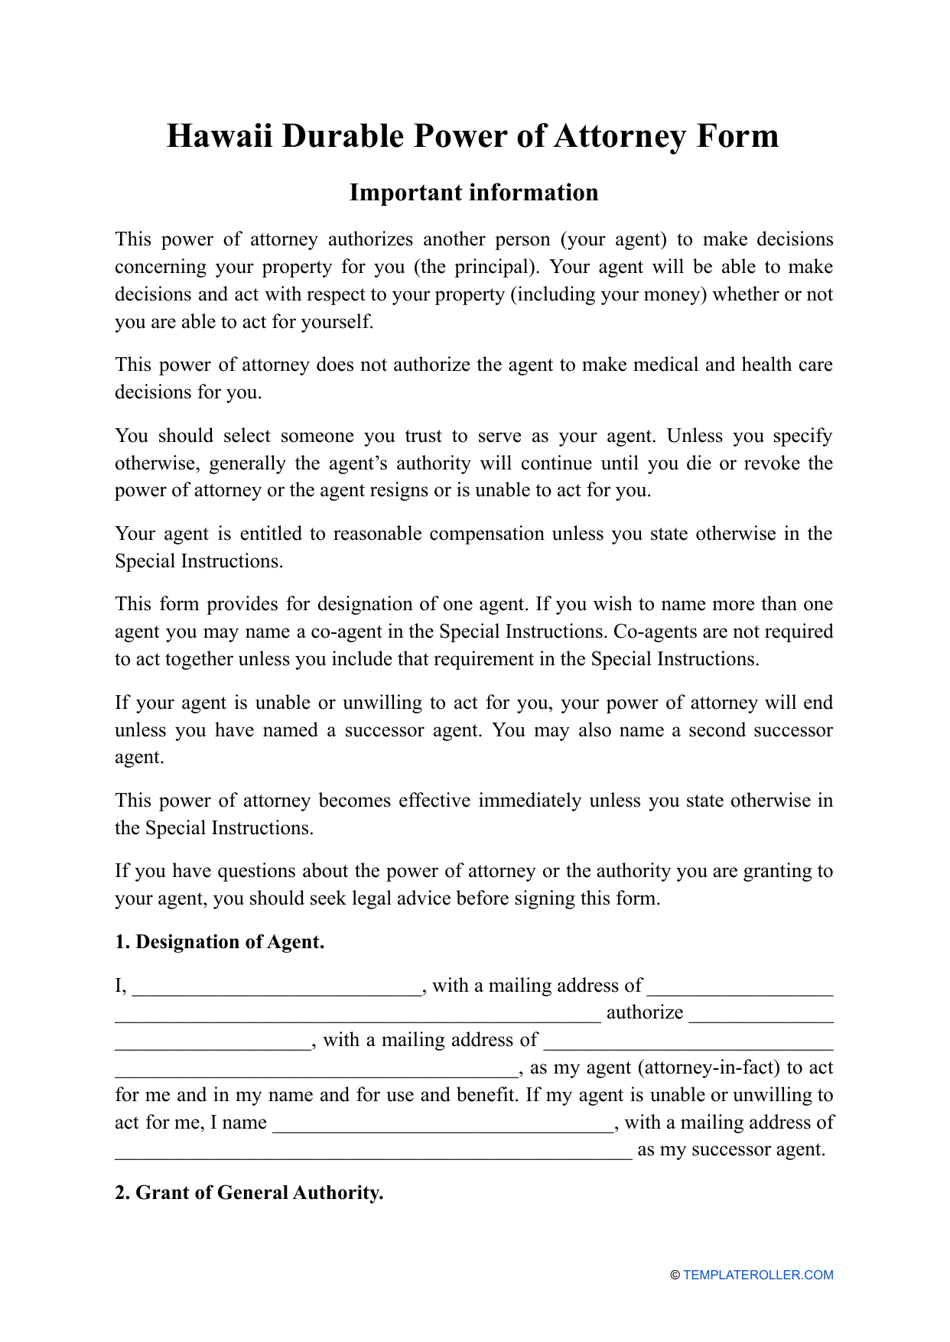 Durable Power of Attorney Form - Hawaii, Page 1